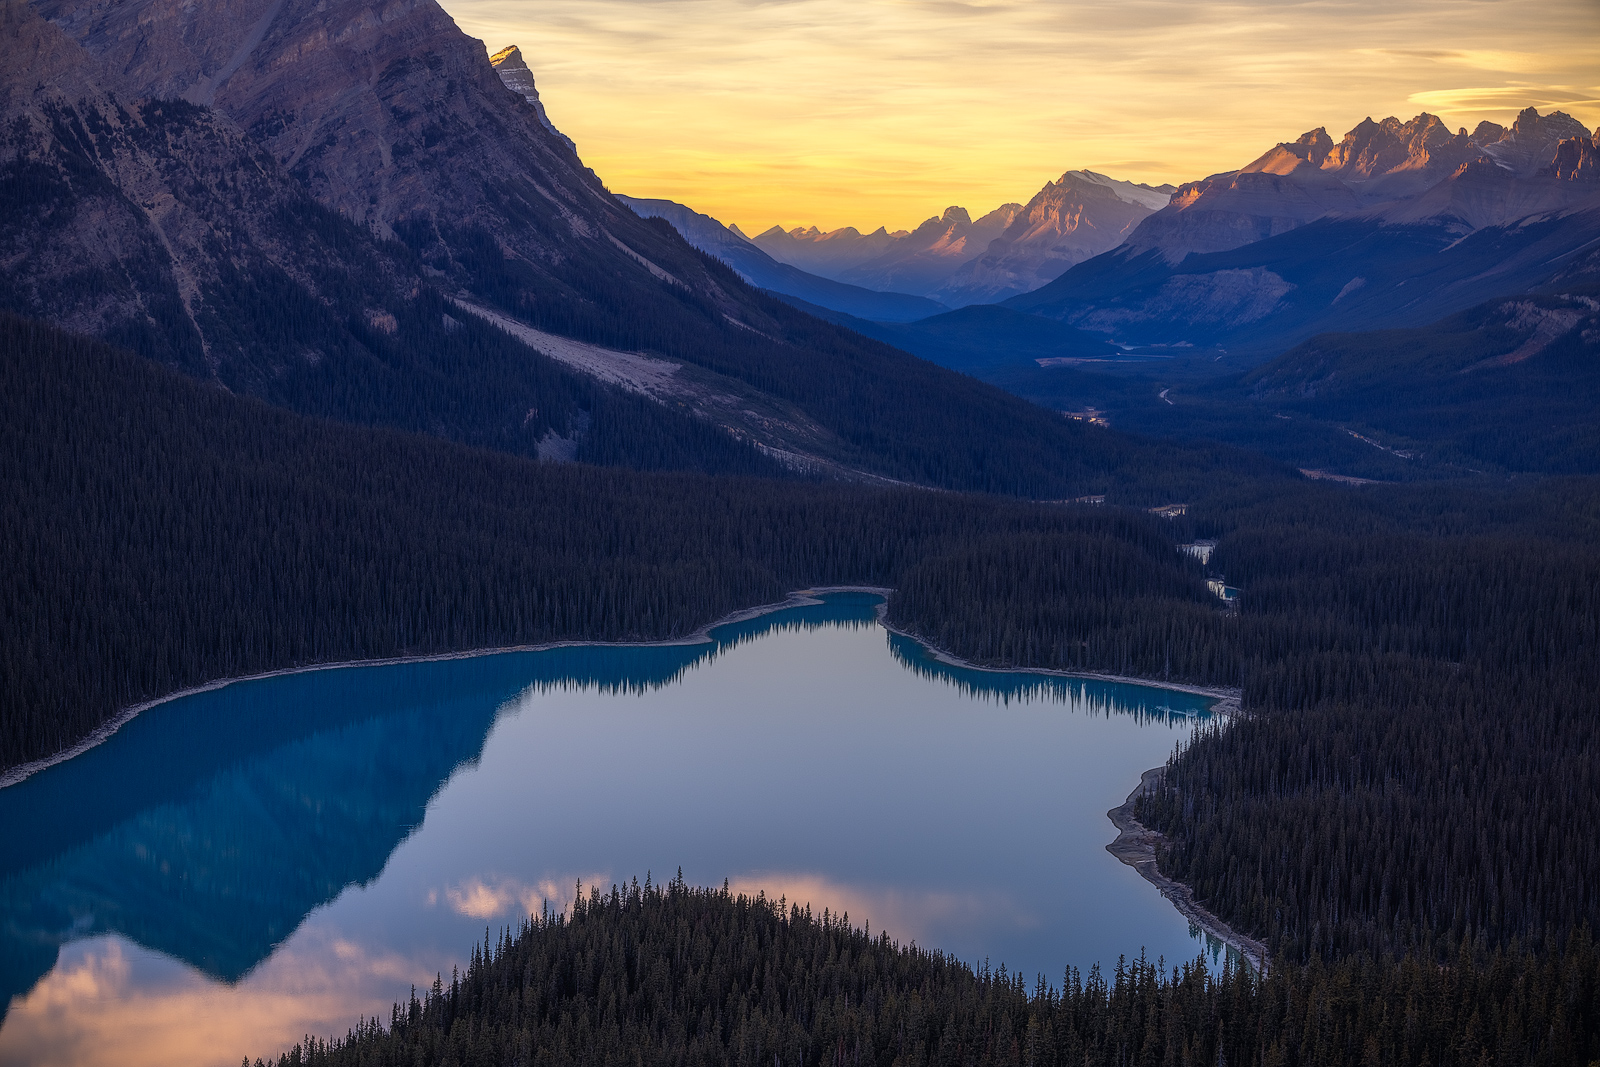 An iconic viewpoint high up in the Canadian Rockies at sunset.